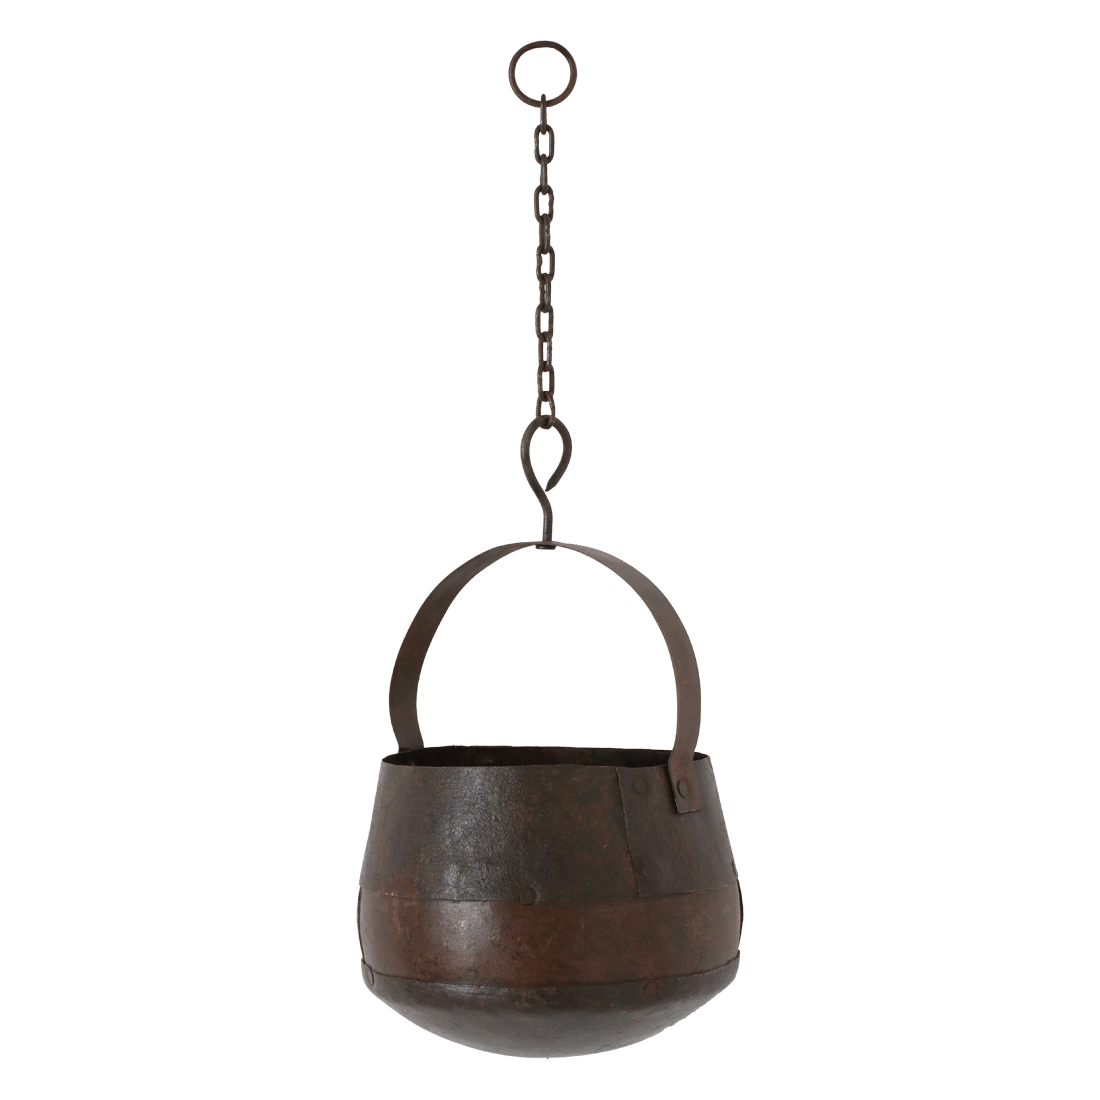 Metal hanging pot with chain